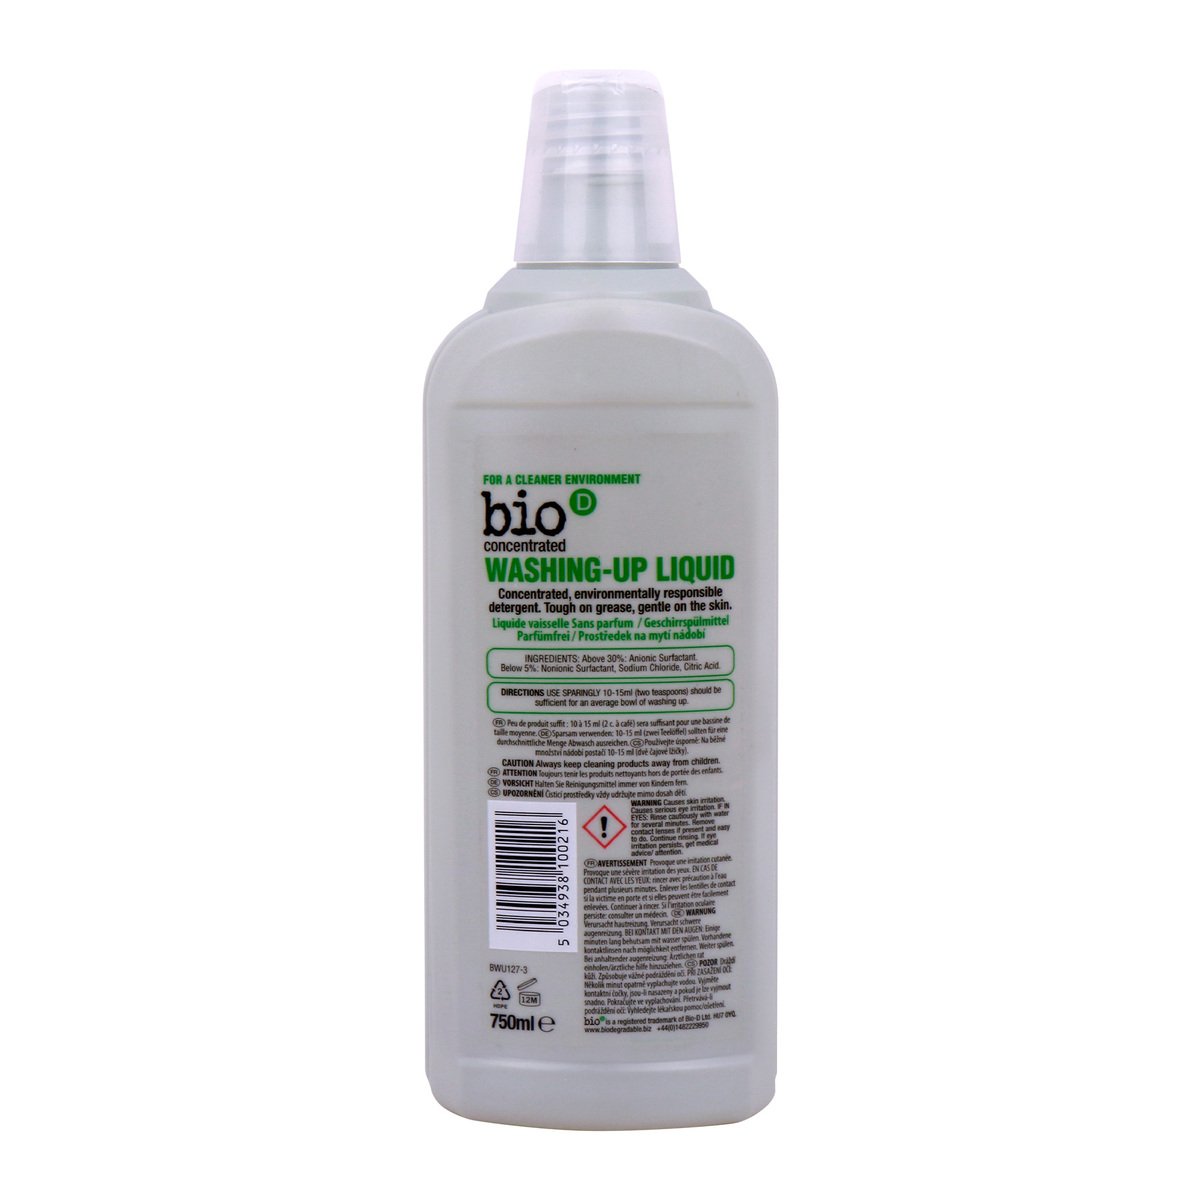 Bio D Concentrated Washing Up Liquid 750ml